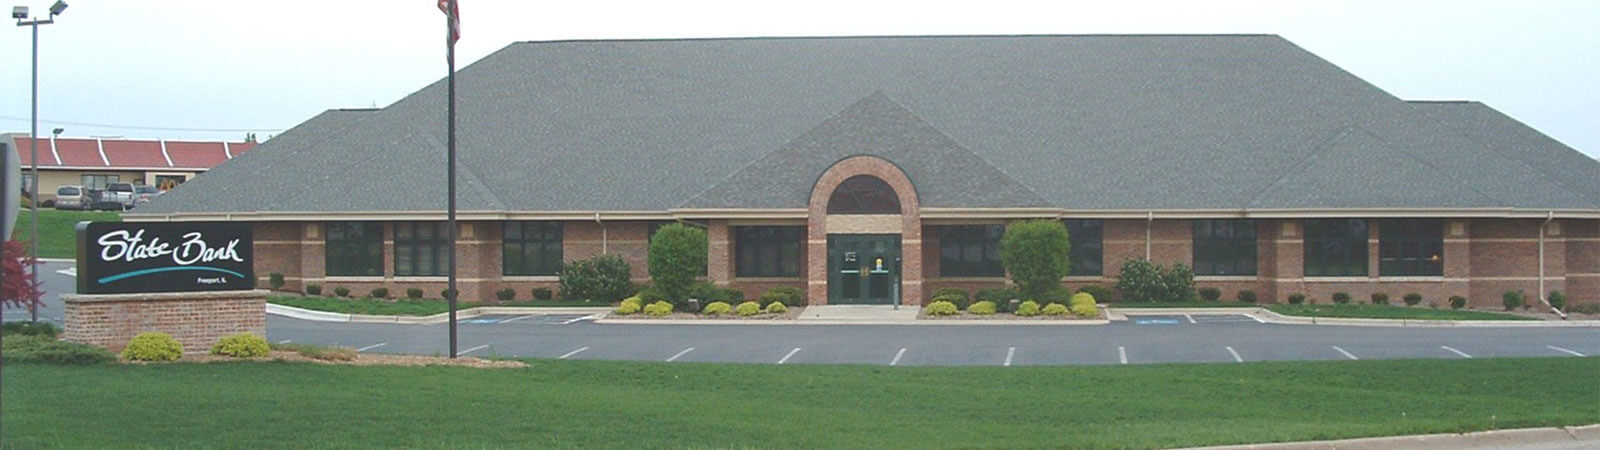 exterior of state bank building